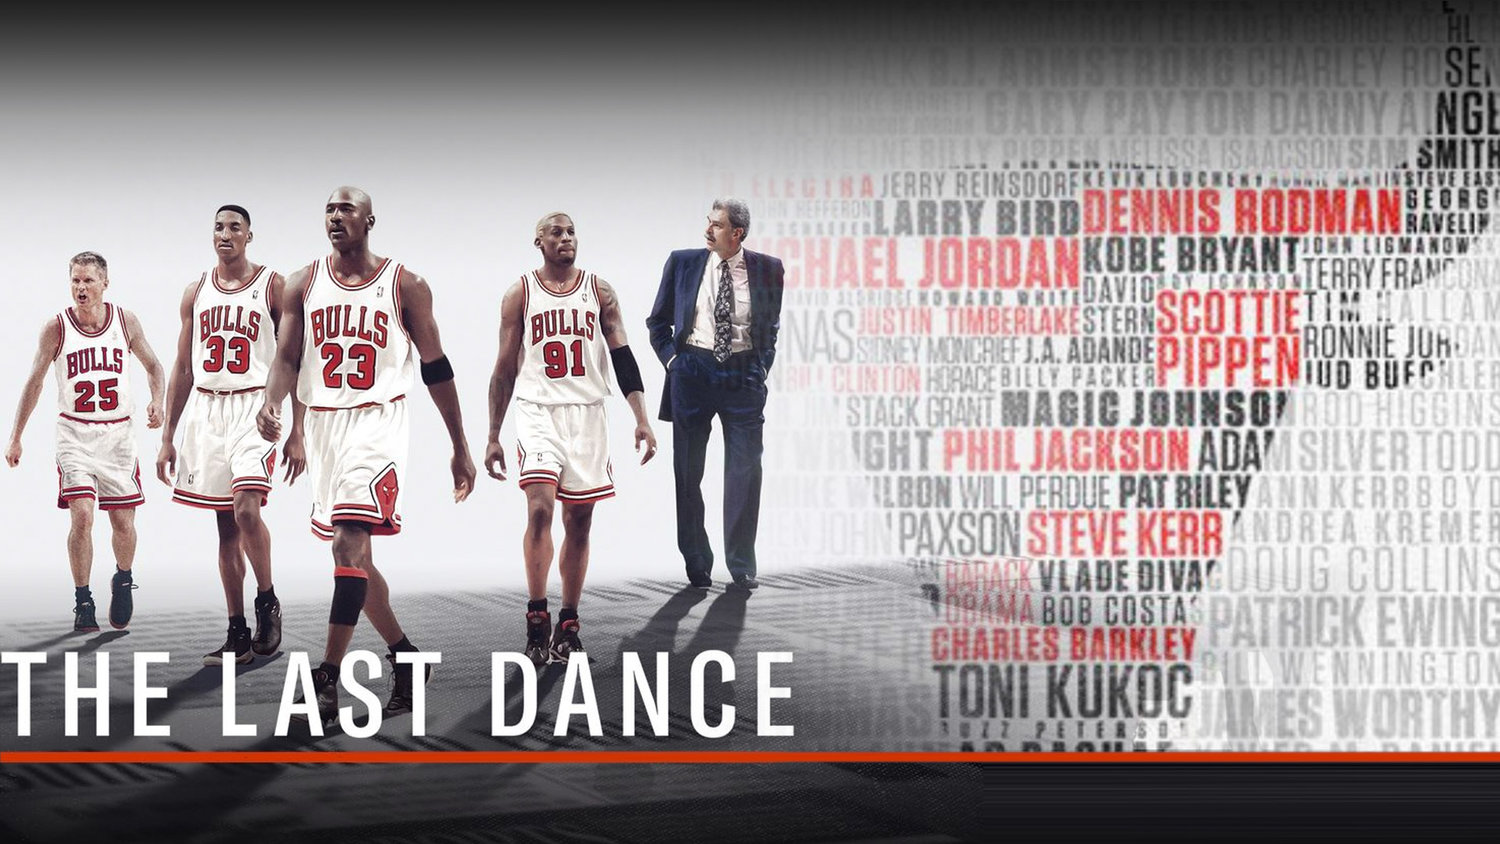 Watch the Michael Jordan Documentary ‘The Last Dance’ and More on Netflix in July